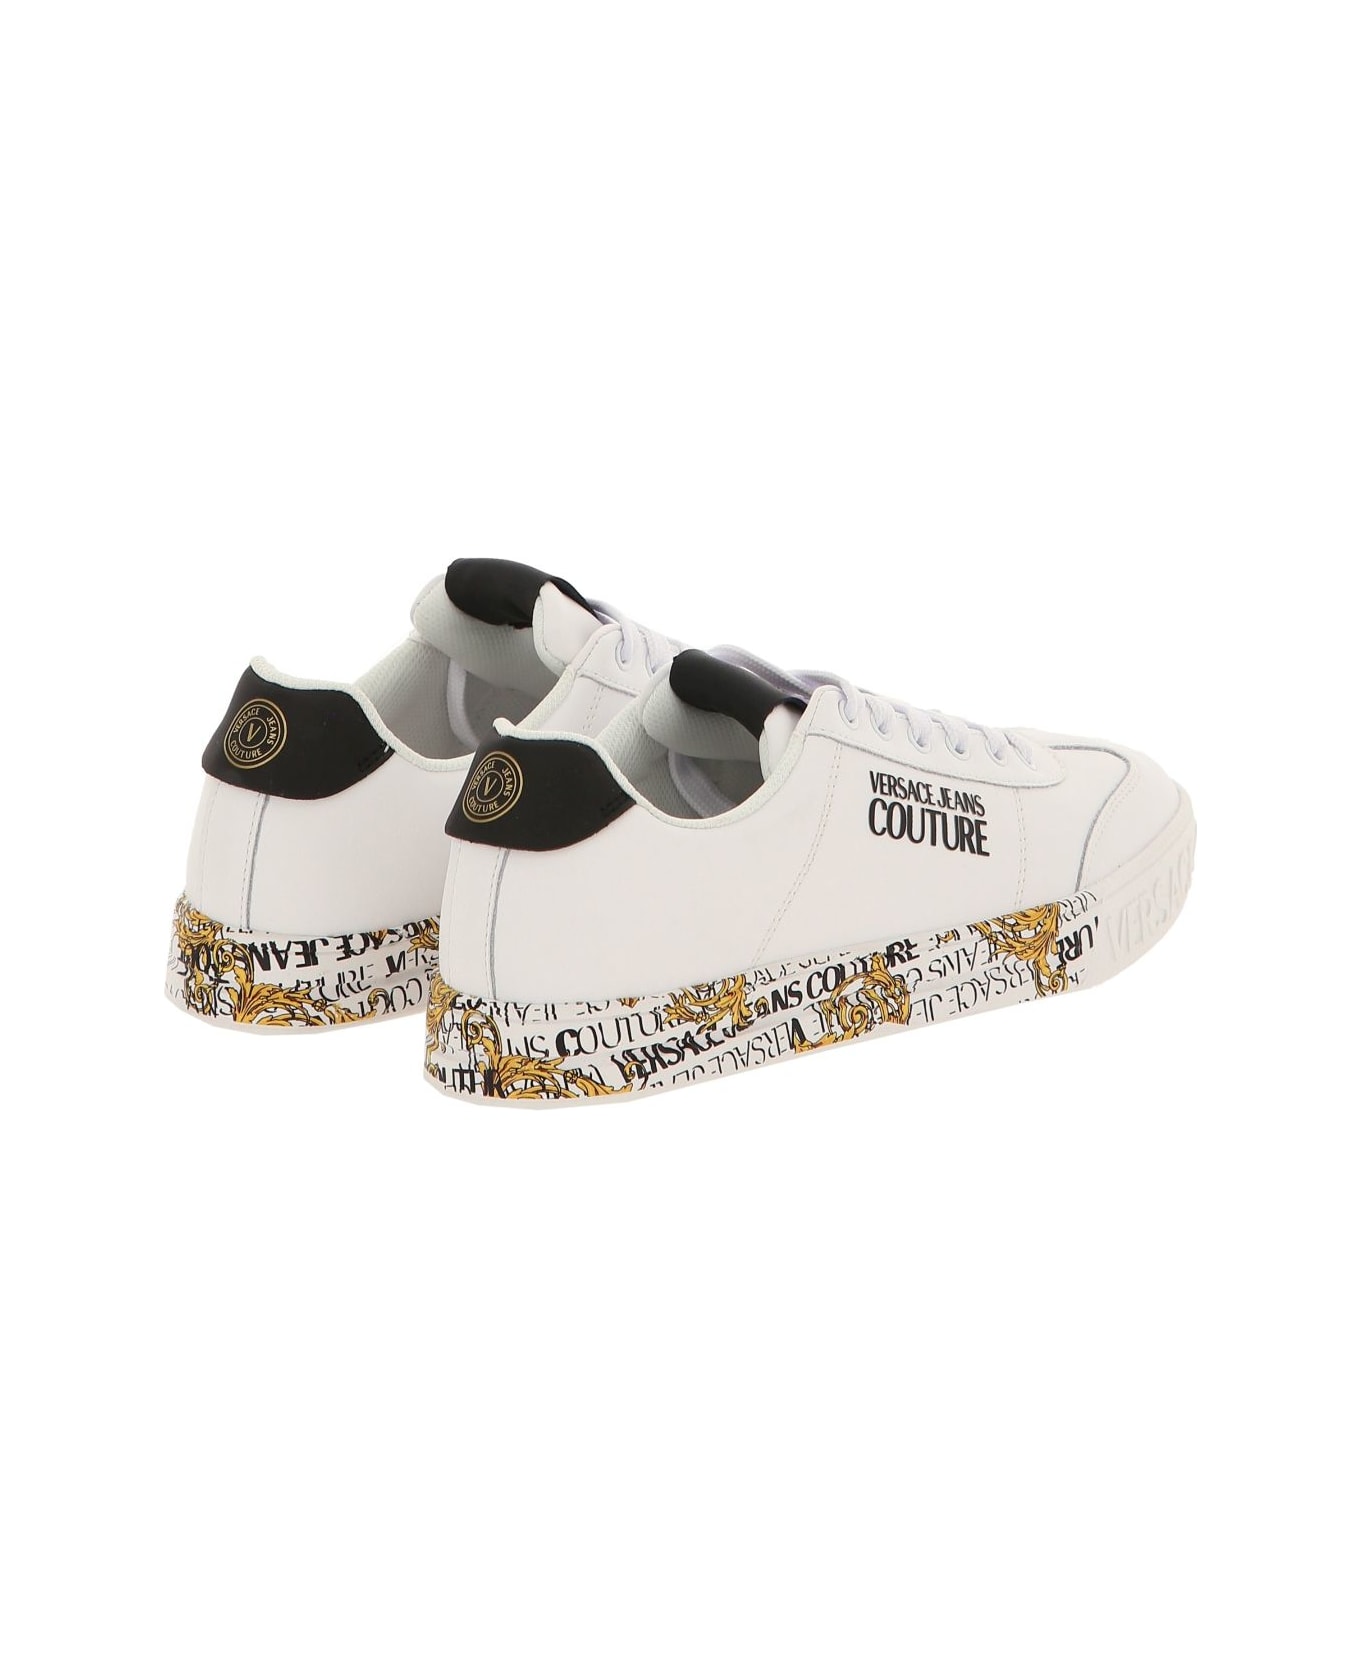 Versace Jeans Couture White Sneakers - White